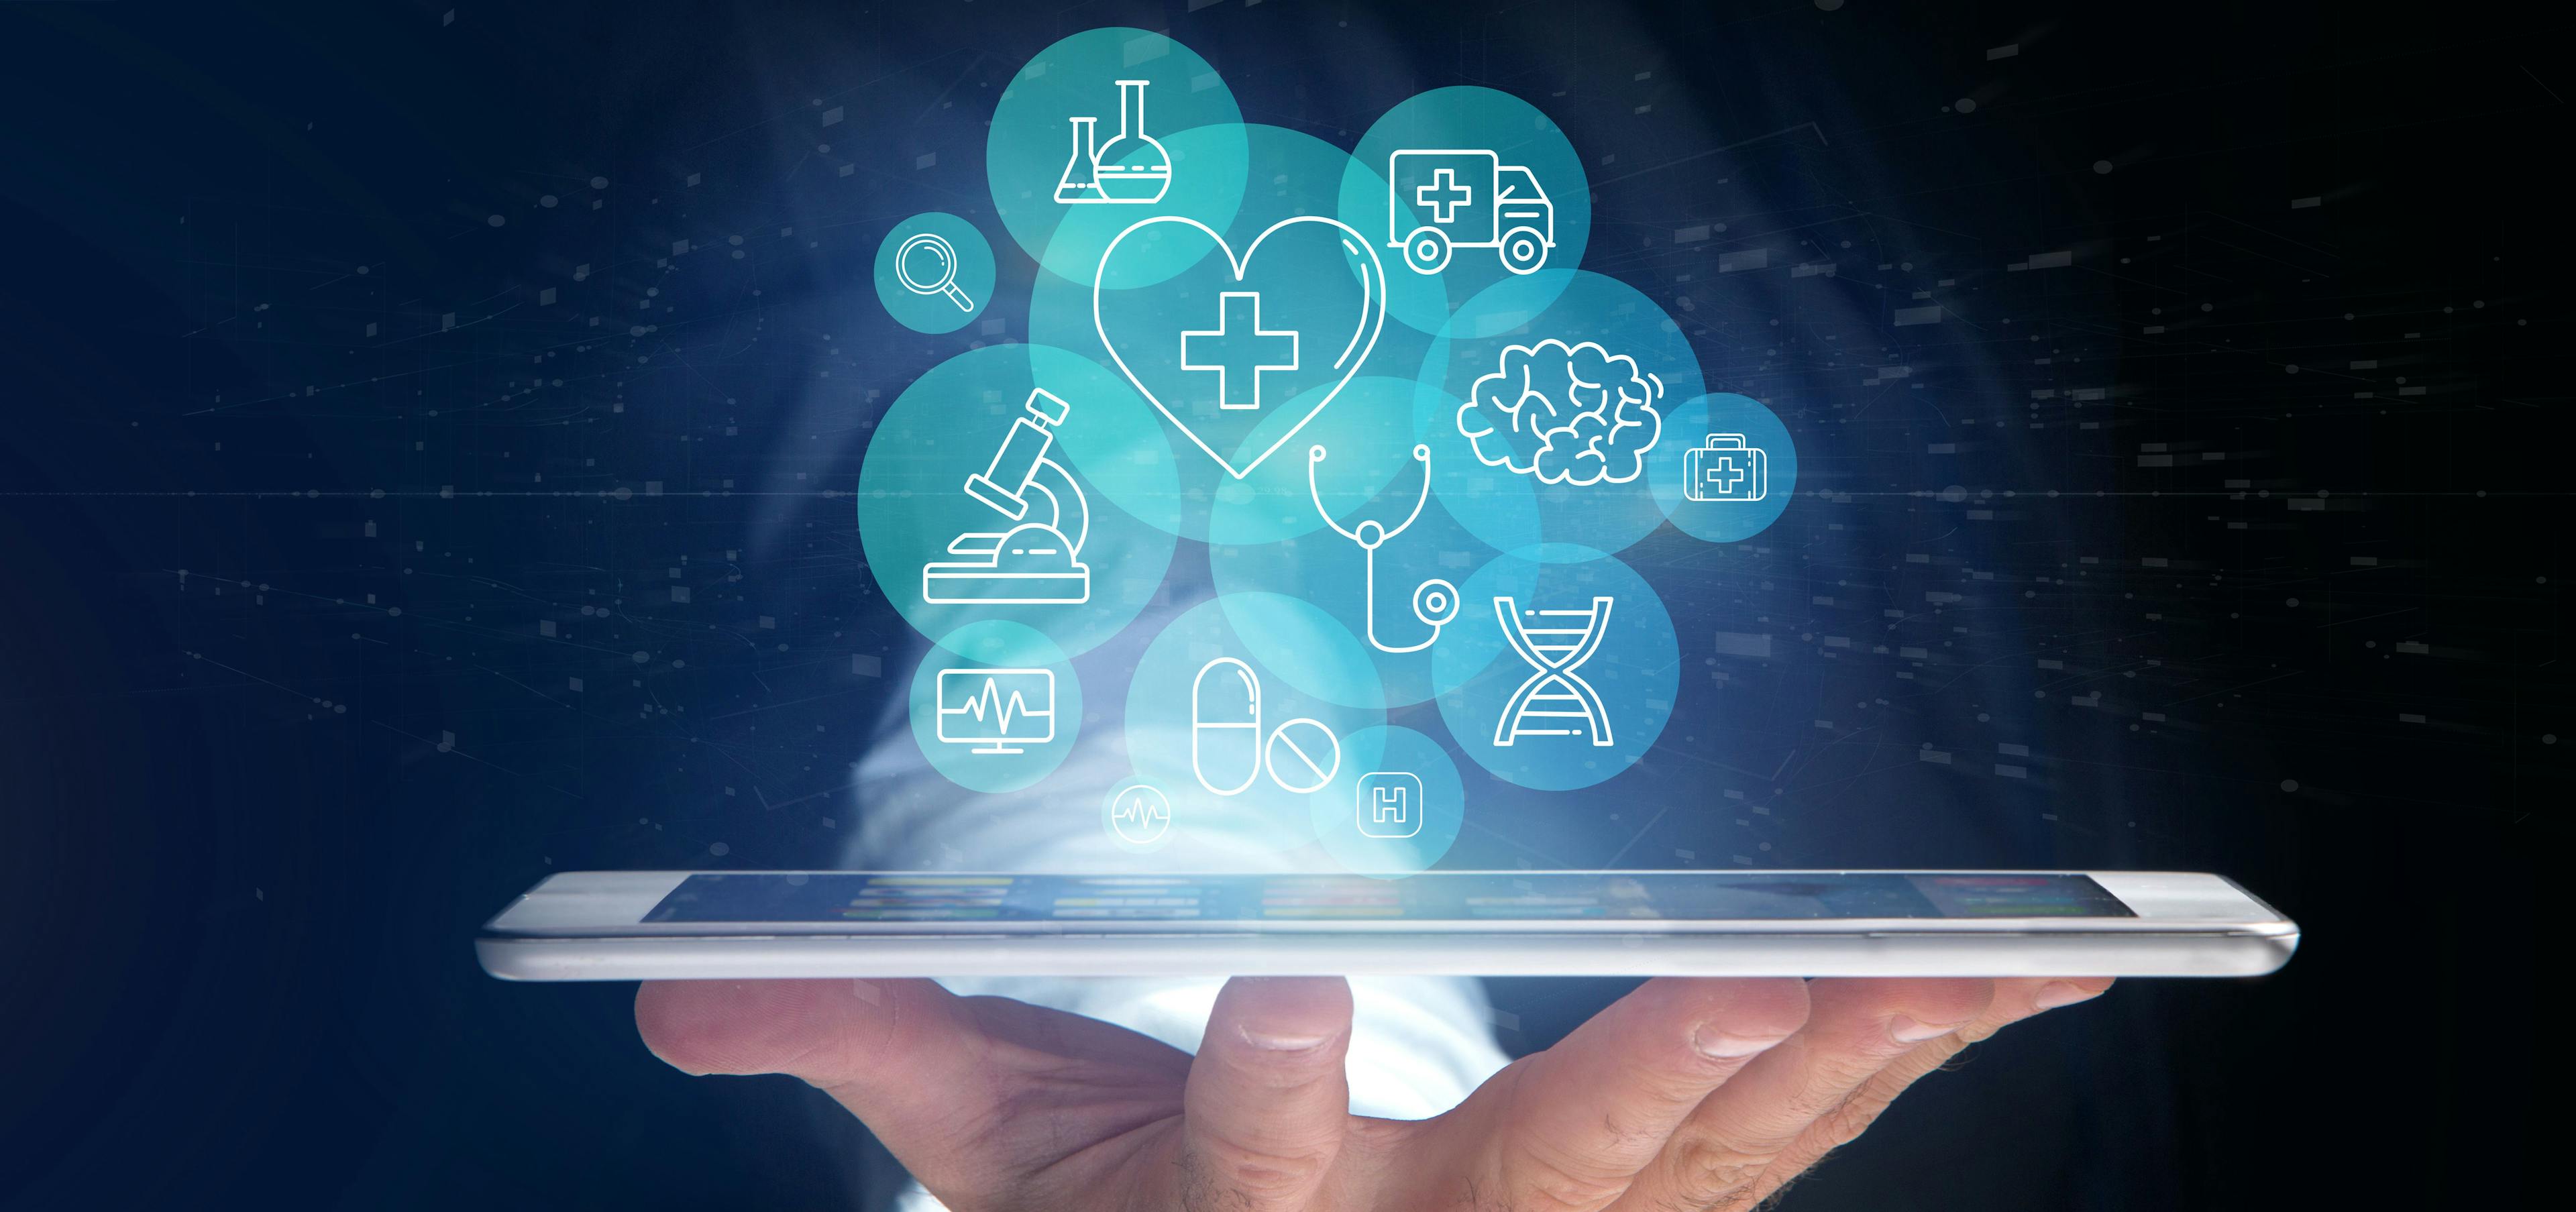 The Future of Wellness: Digital Health and the Human Element